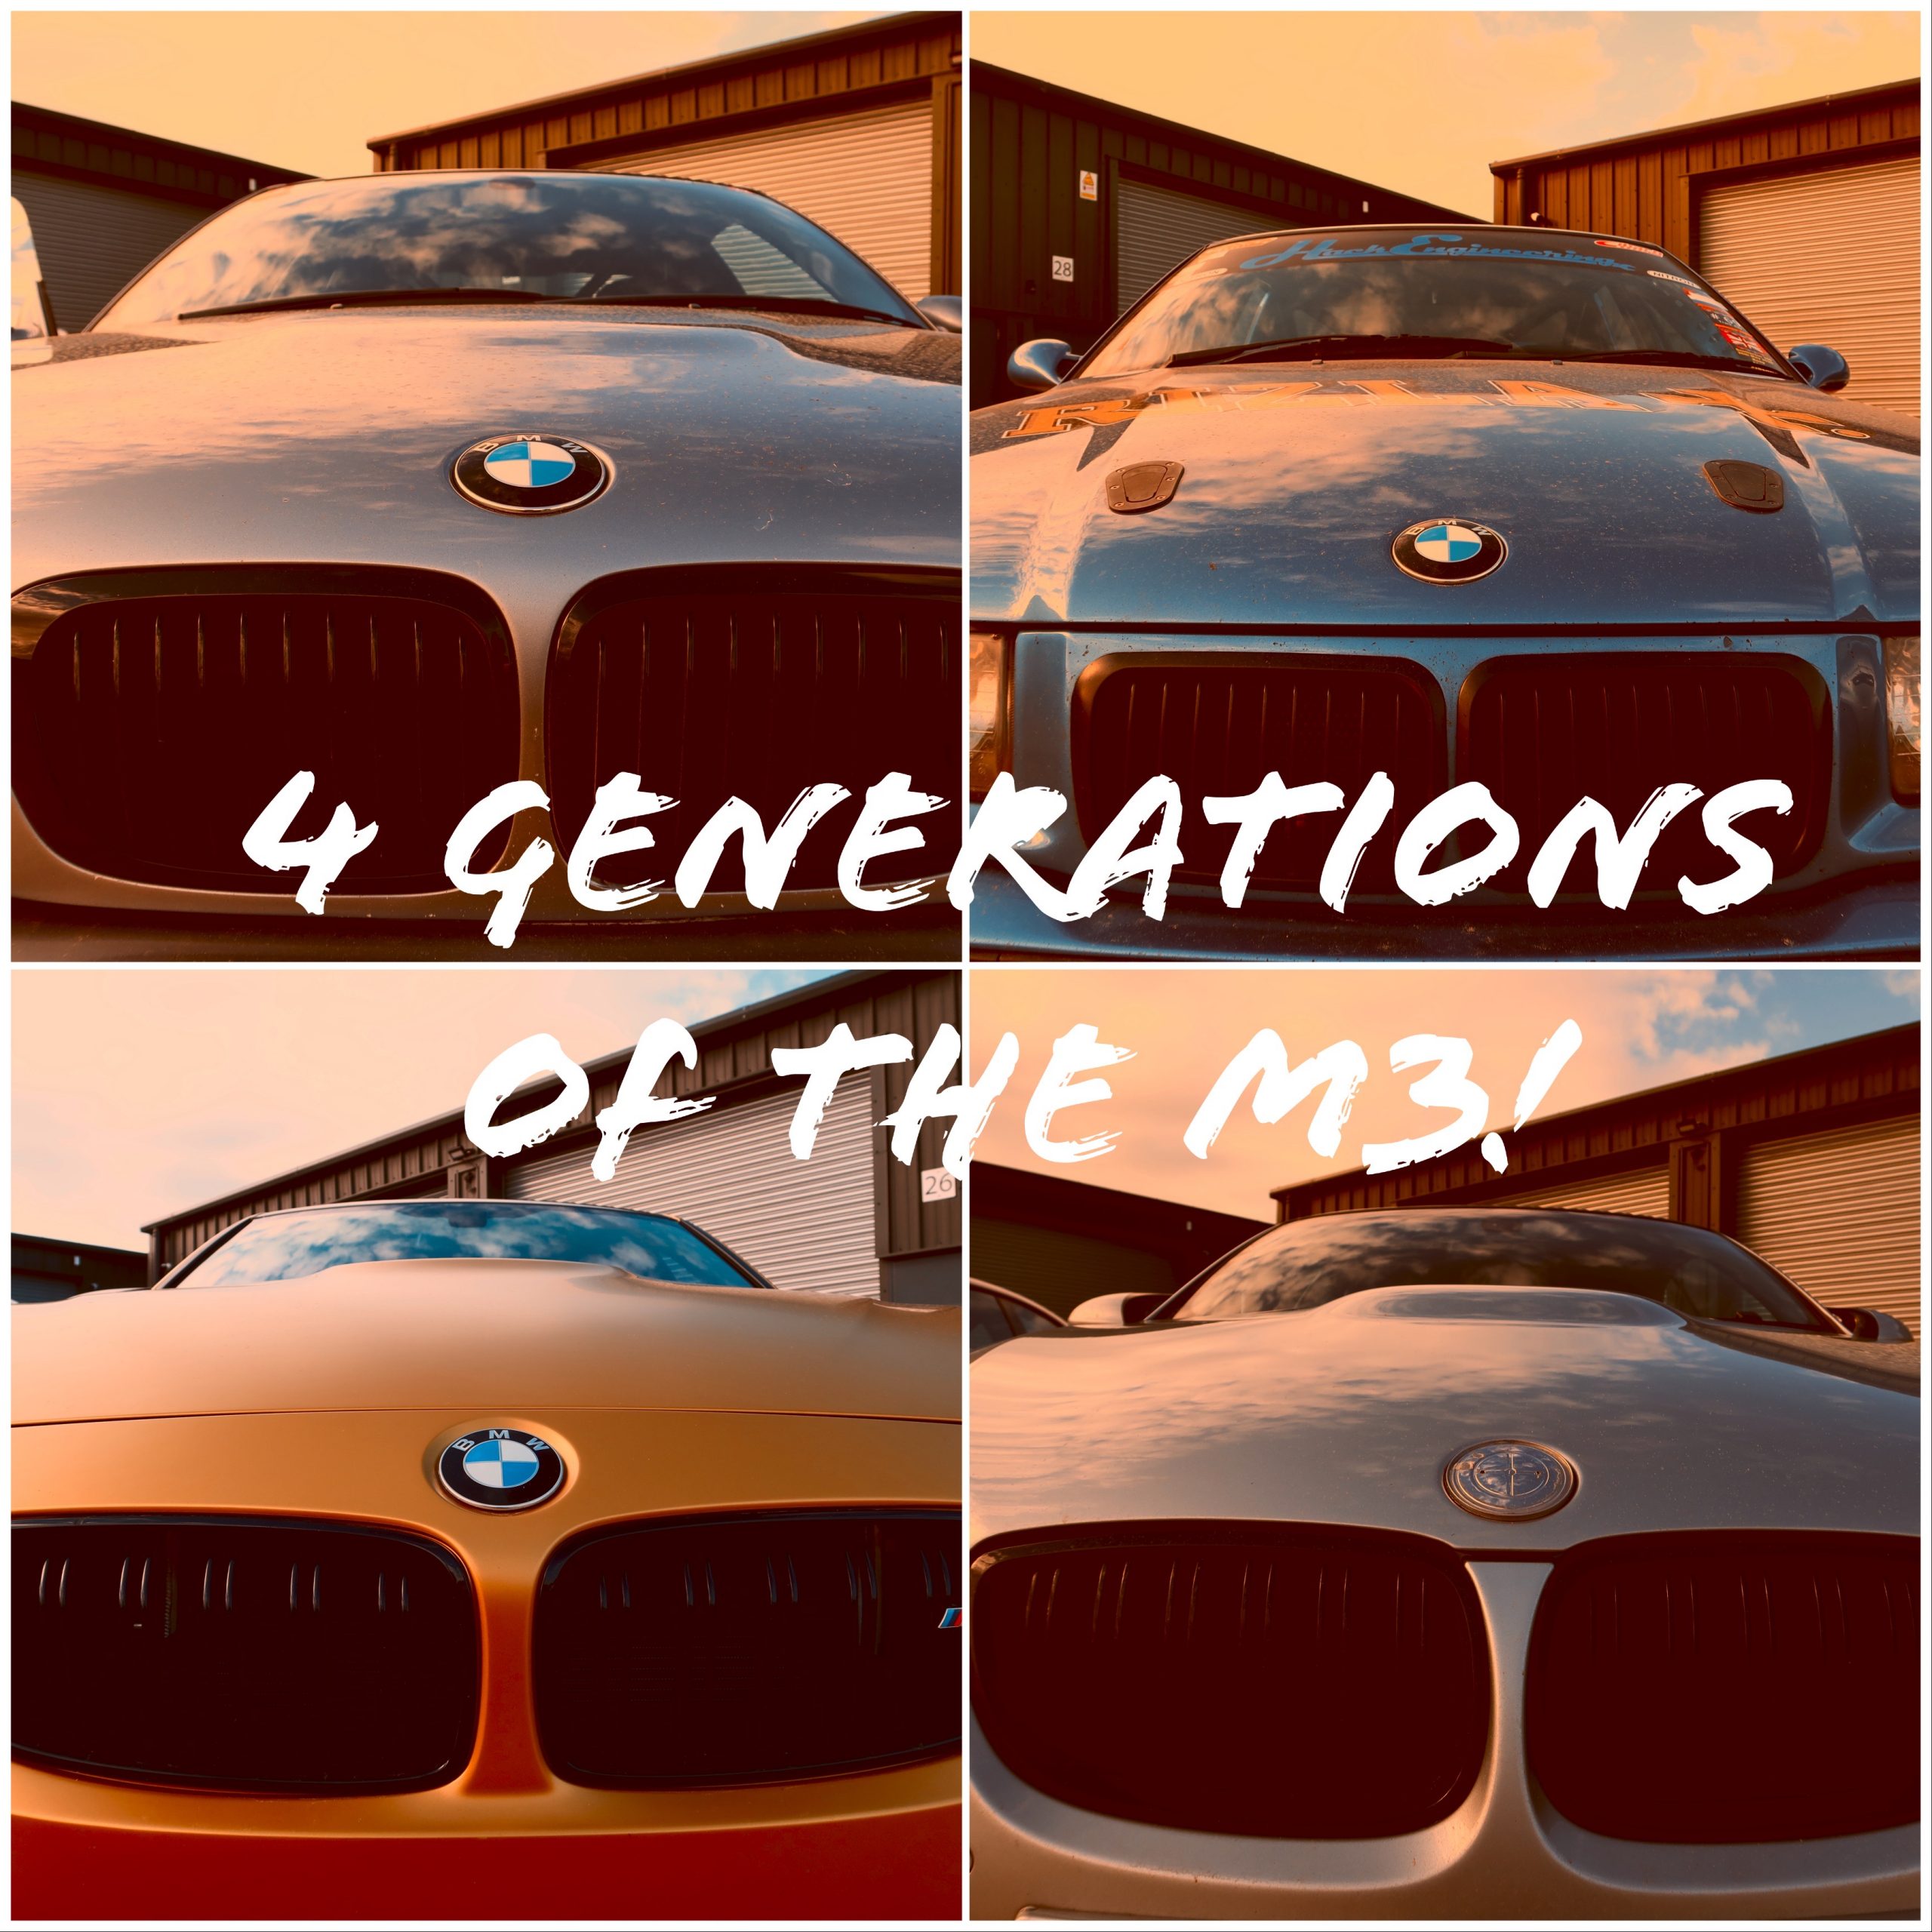 Video: Four Generations of M3! Did they get better?